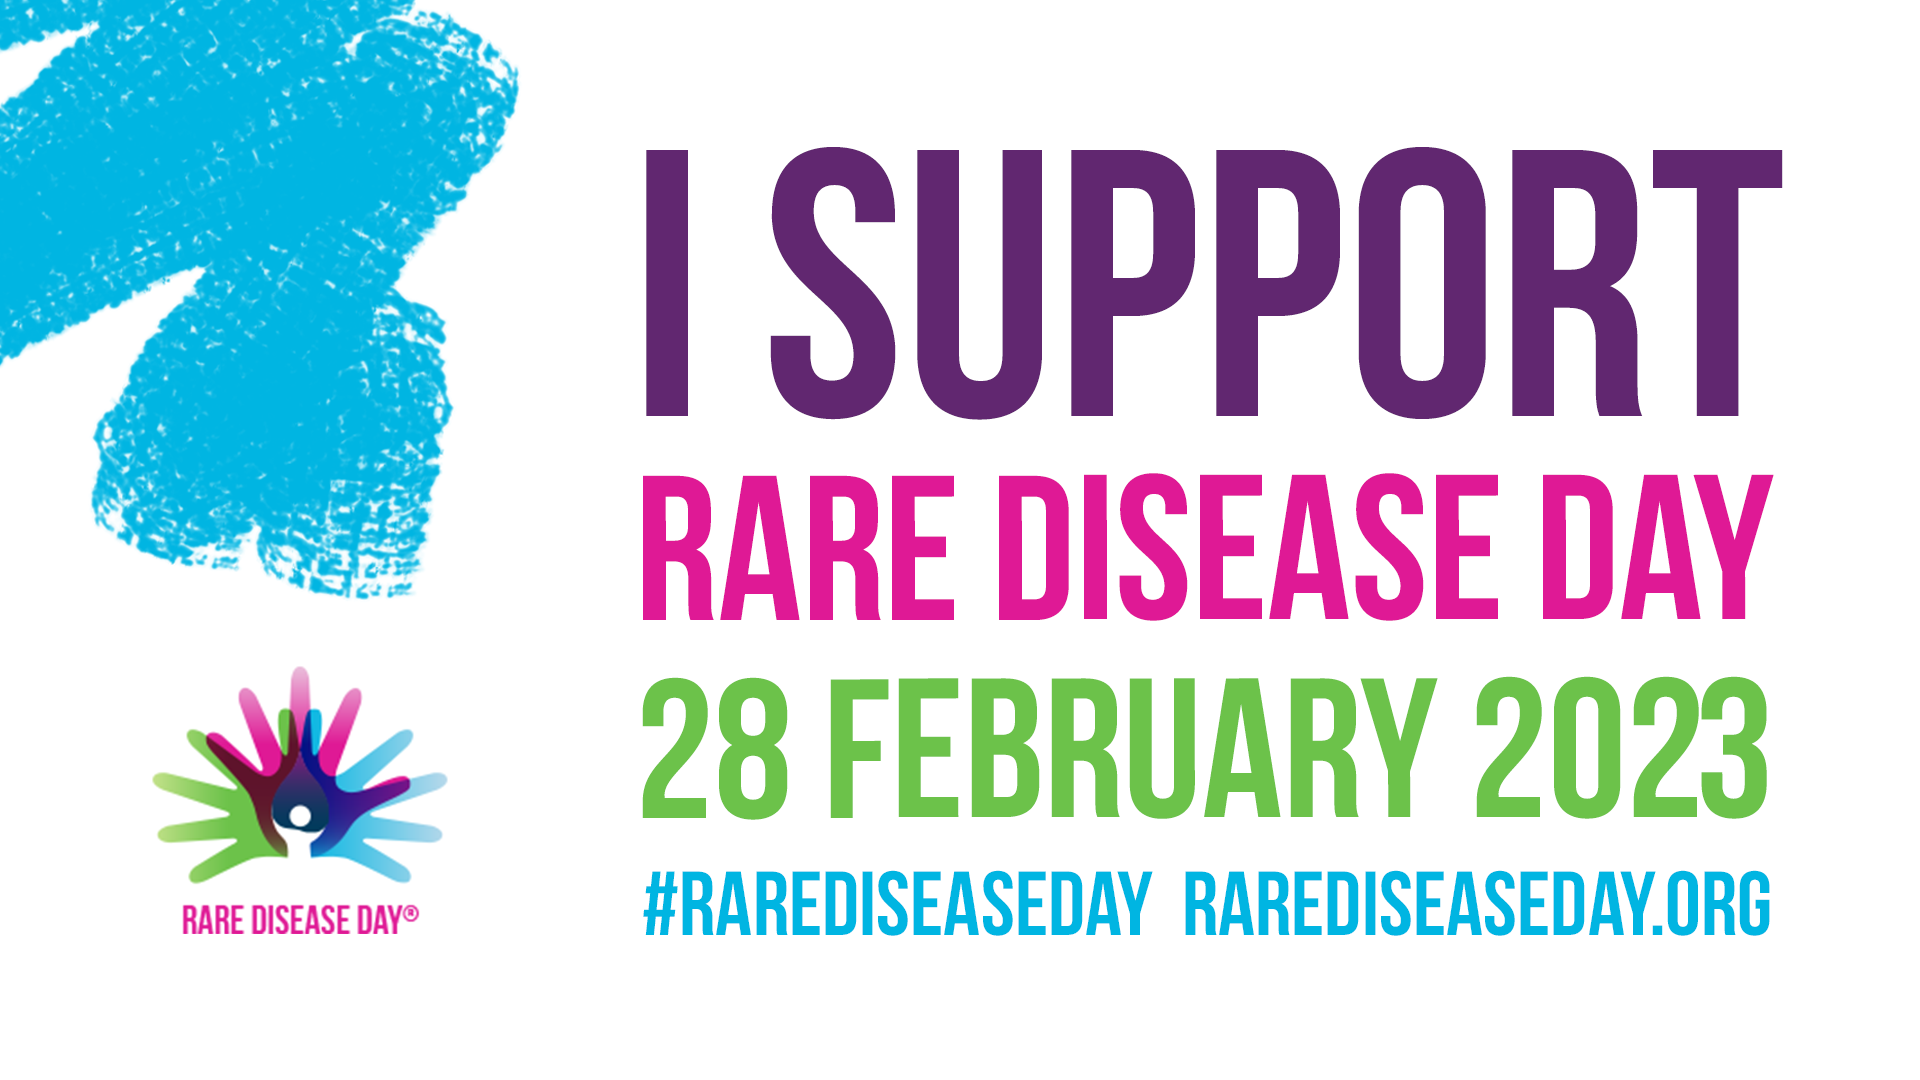 I support rare disease day. 28 February 2023